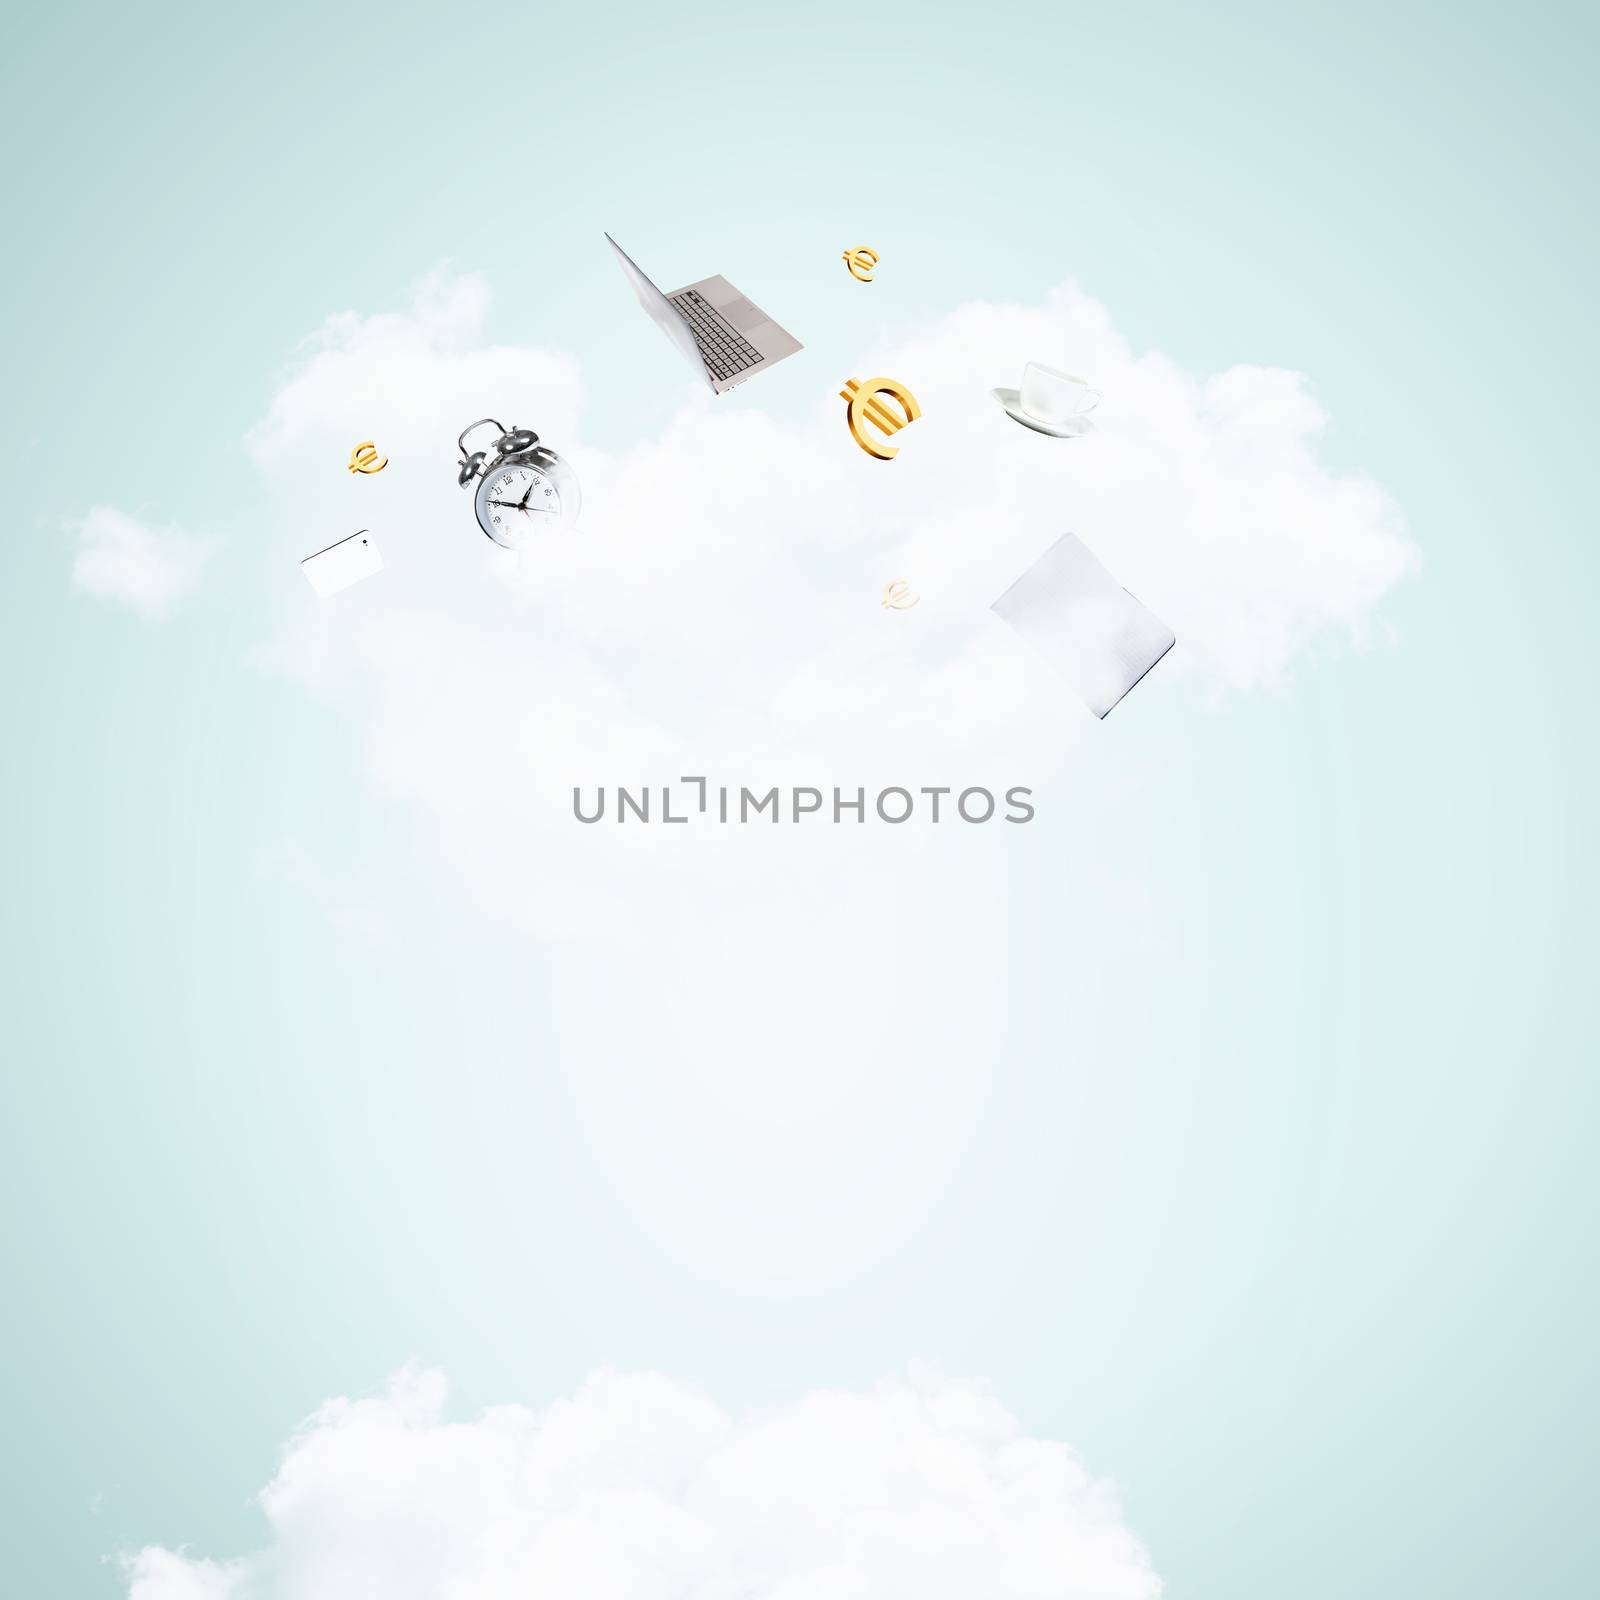 Abstract light blue background with various objects